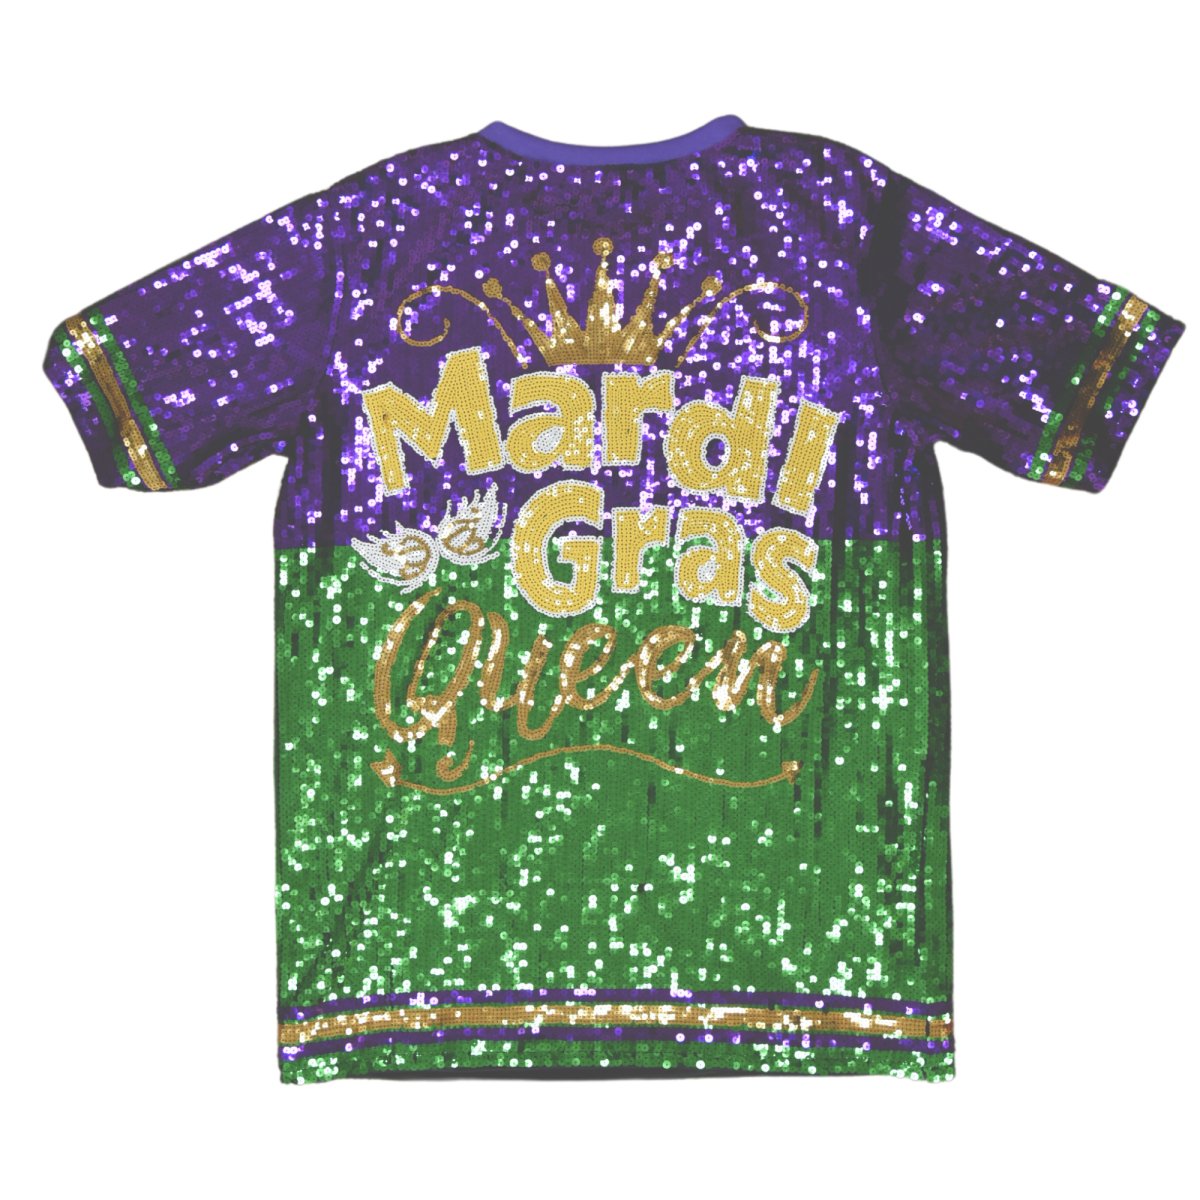 SEQUIN Gras Mardi - Lettered With Yellow, Dress Trim Purple, Green & Apparel